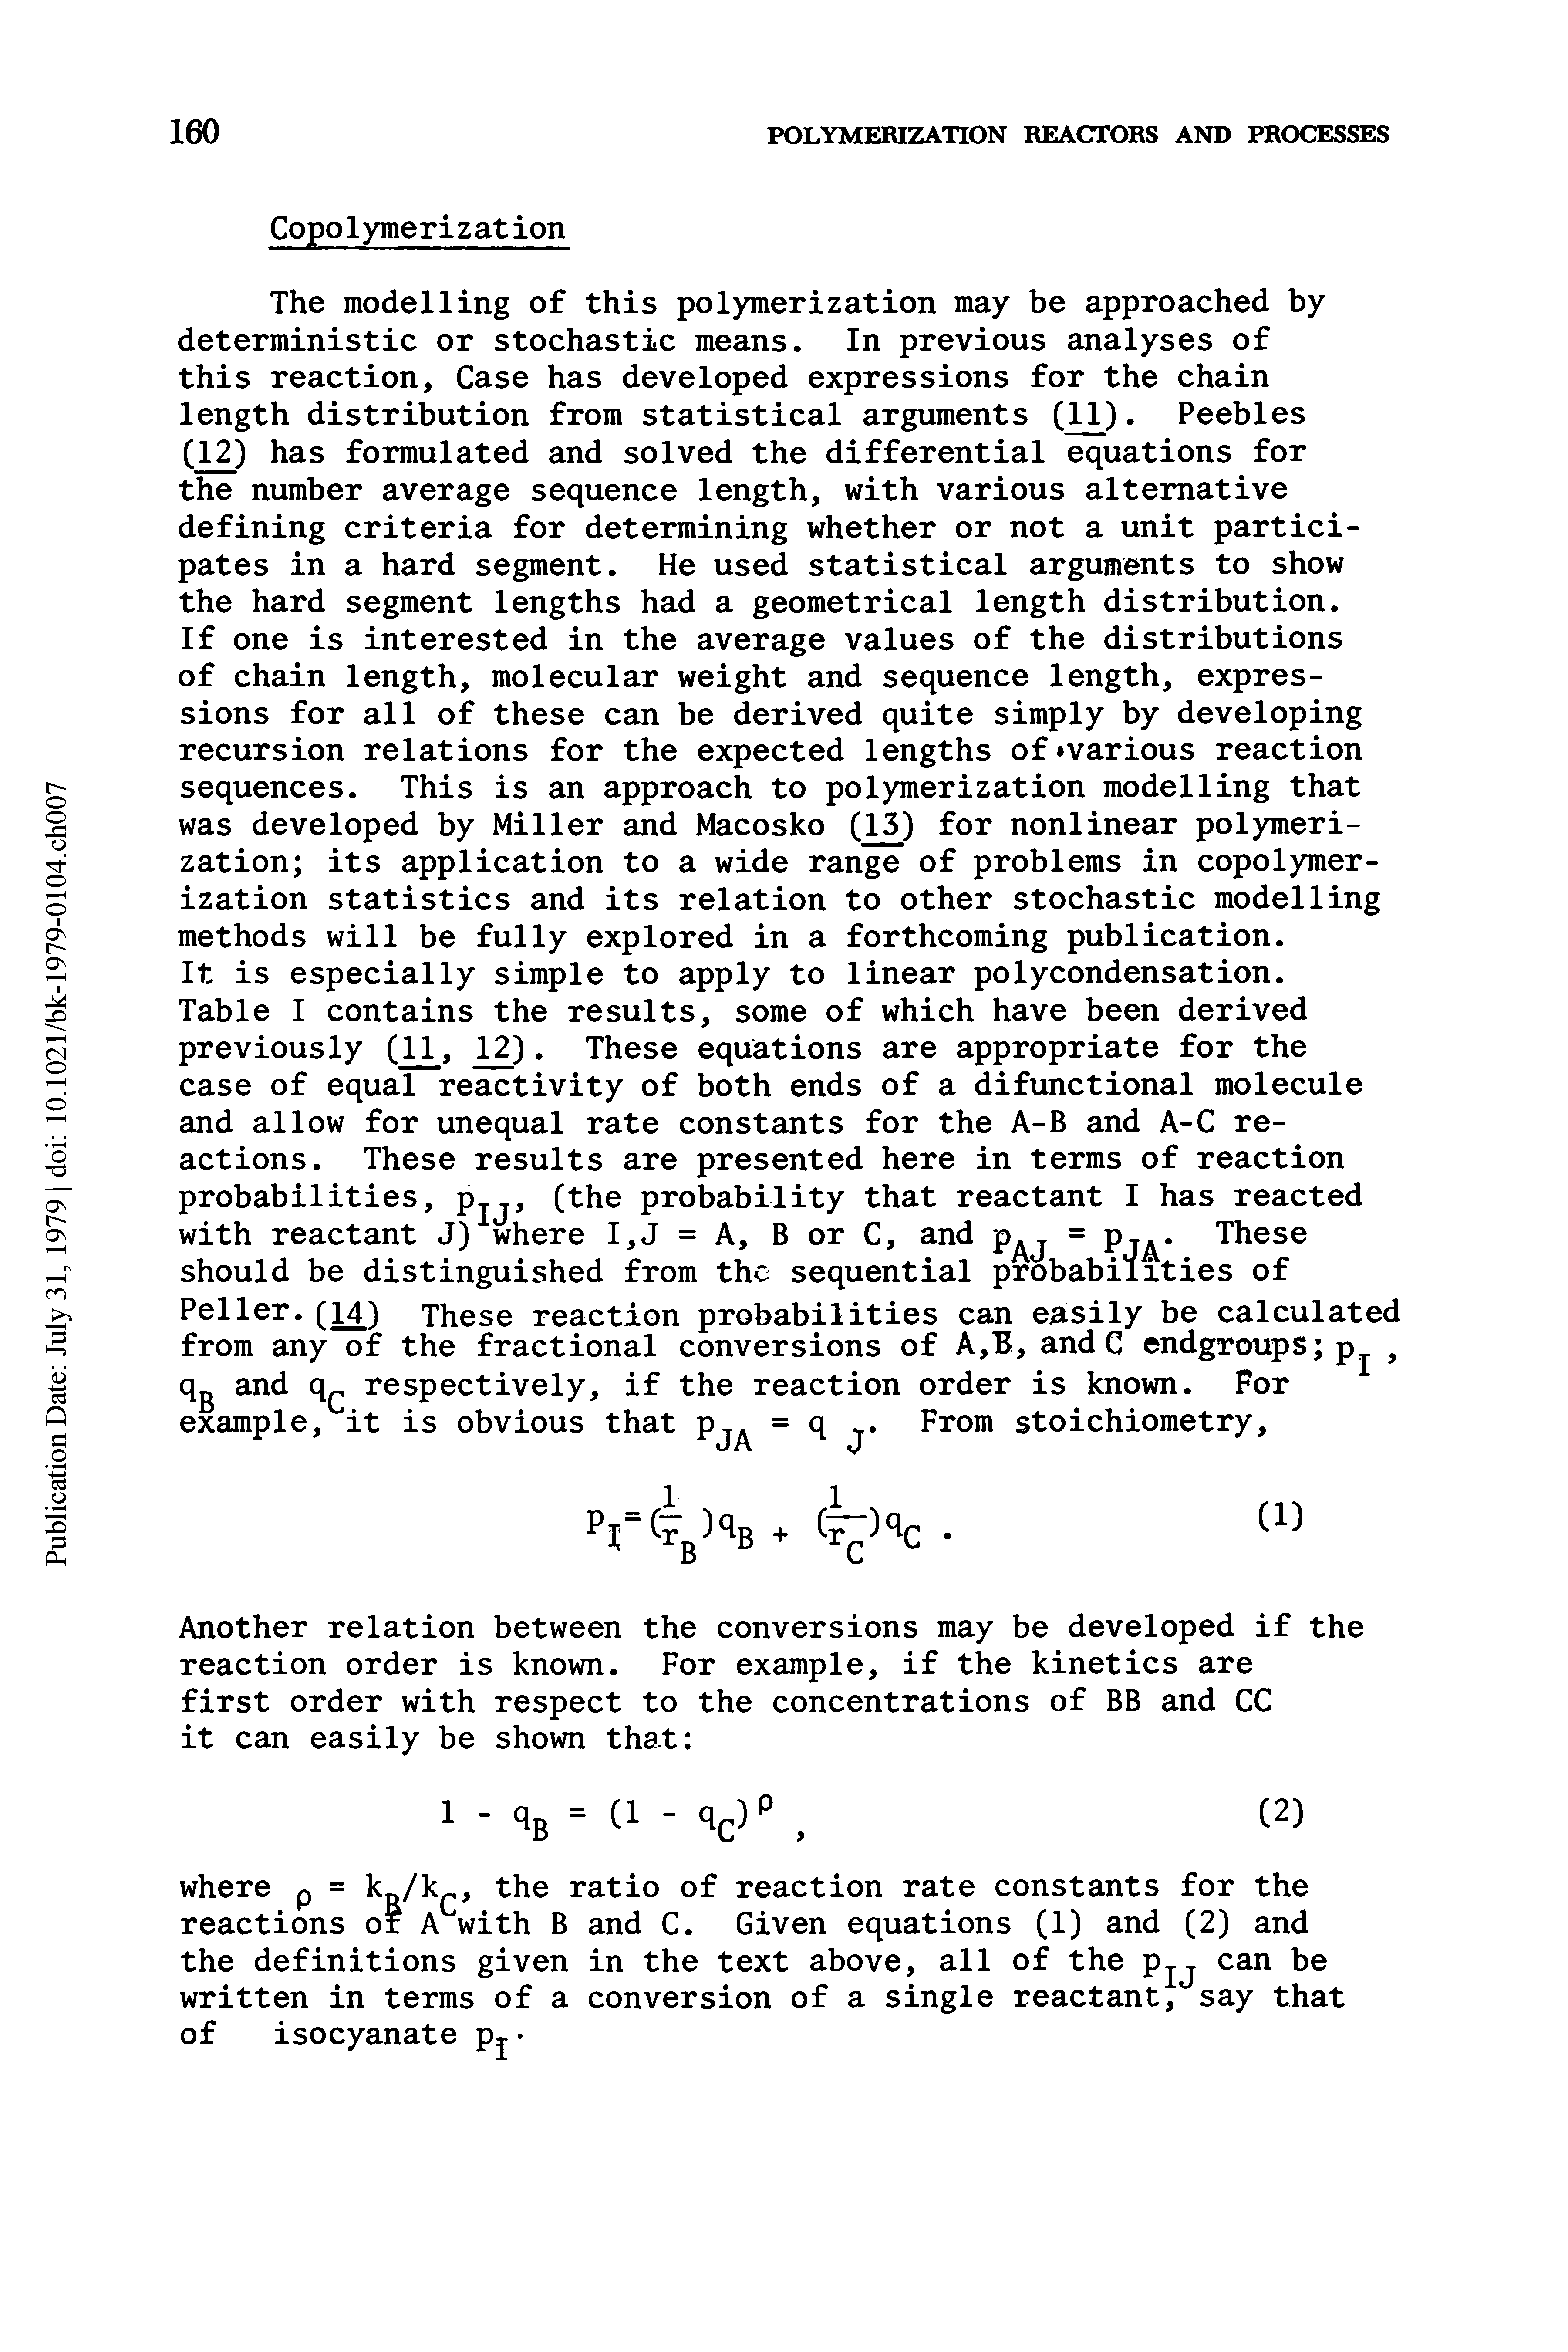 Table I contains the results, some of which have been derived previously (11, 12). These equations are appropriate for the case of equal reactivity of both ends of a difunctional molecule and allow for unequal rate constants for the A-B and A-C reactions. These results are presented here in terms of reaction probabilities, p, (the probability that reactant I has reacted with reactant J) where I,J = A, B or C, and p j = Pj - These should be distinguished from the sequential probabilities of...